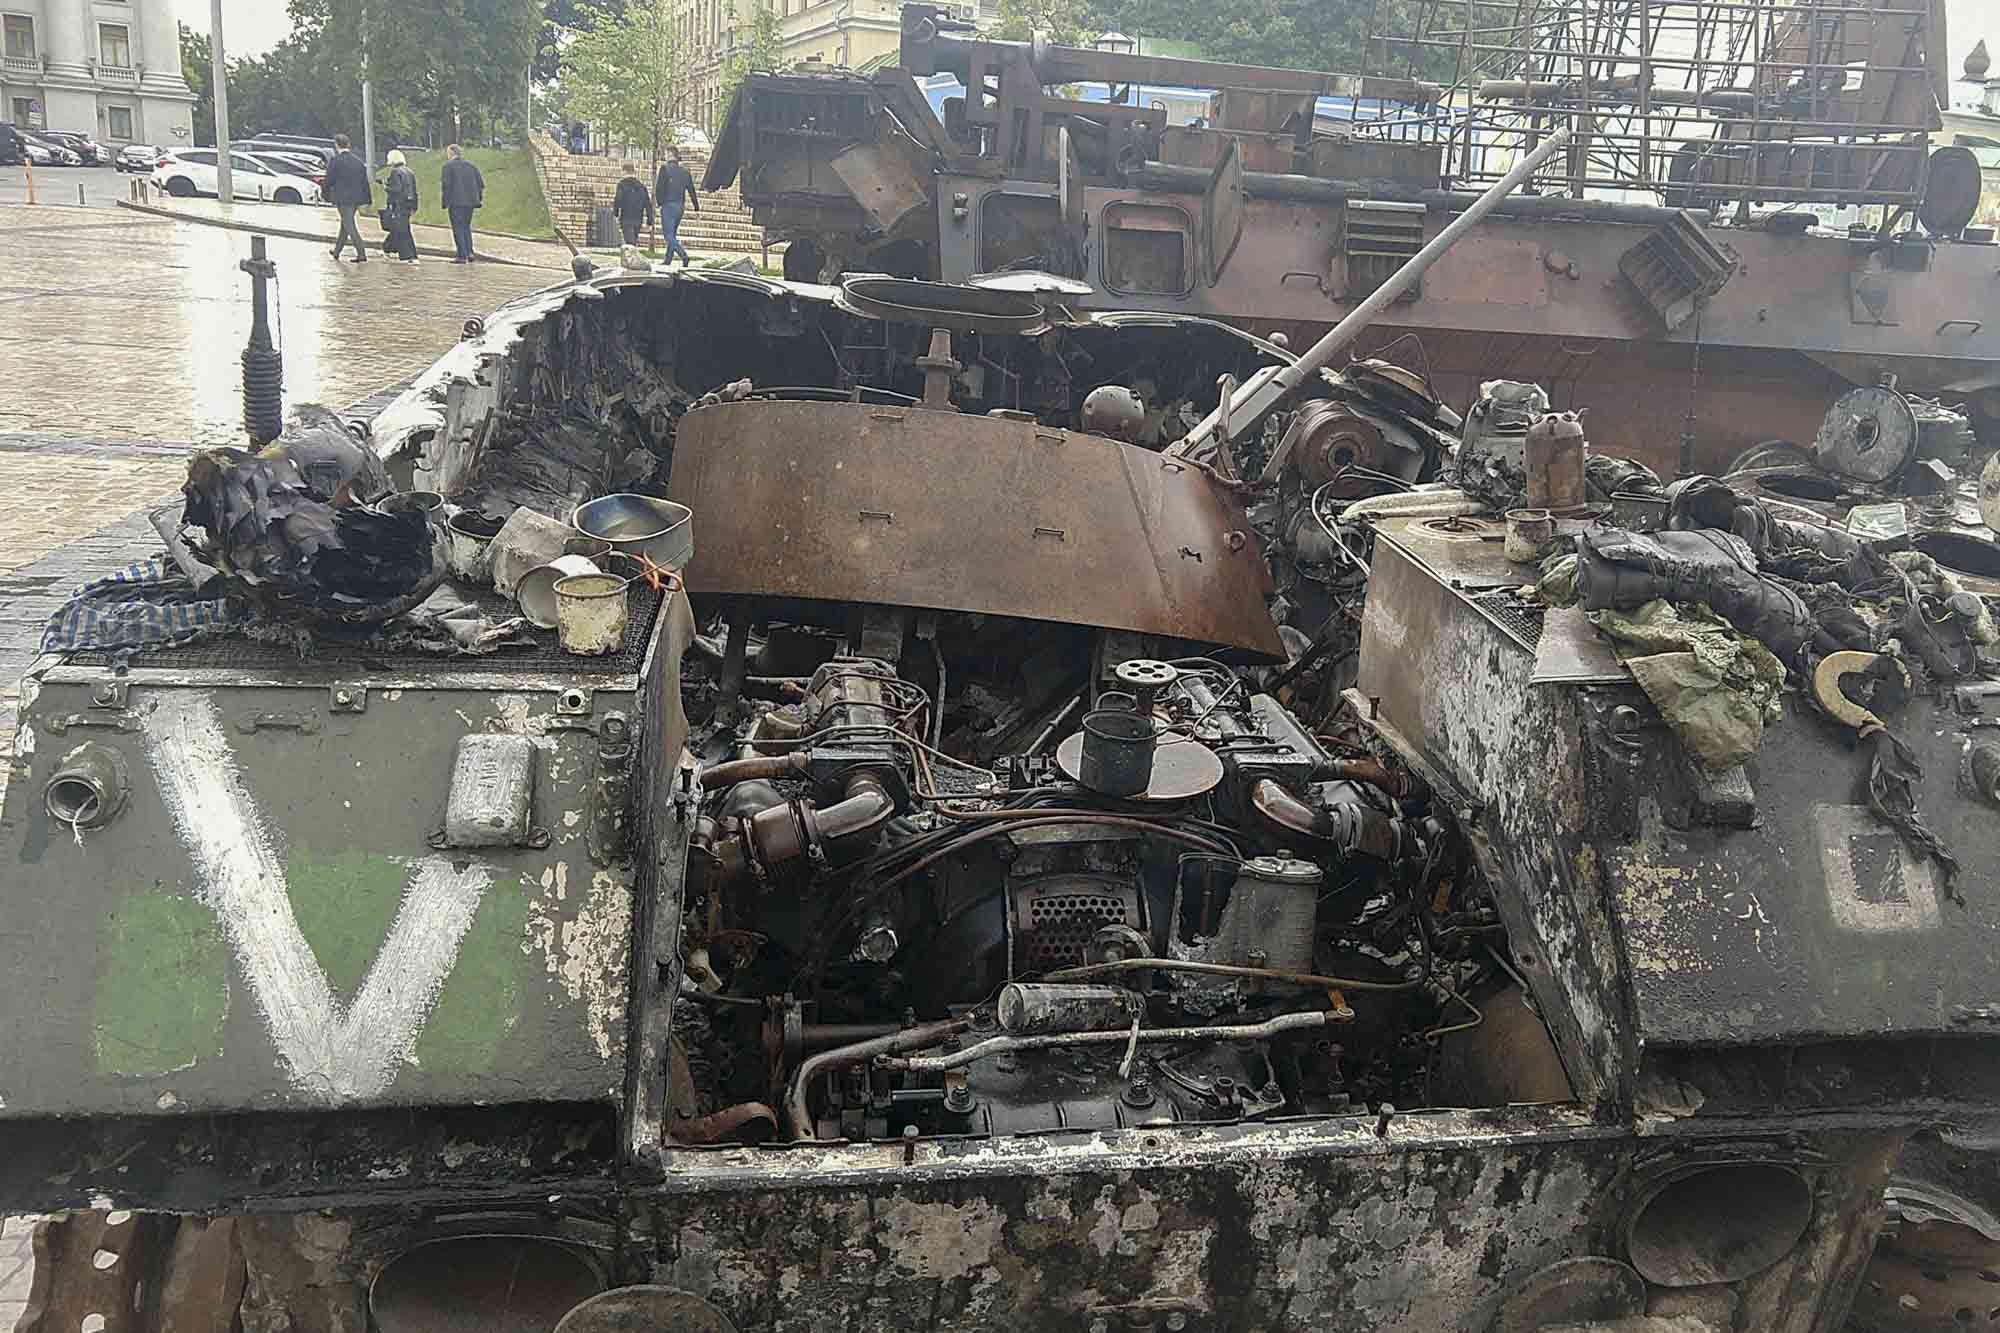 A pile of broken and burned military equipment